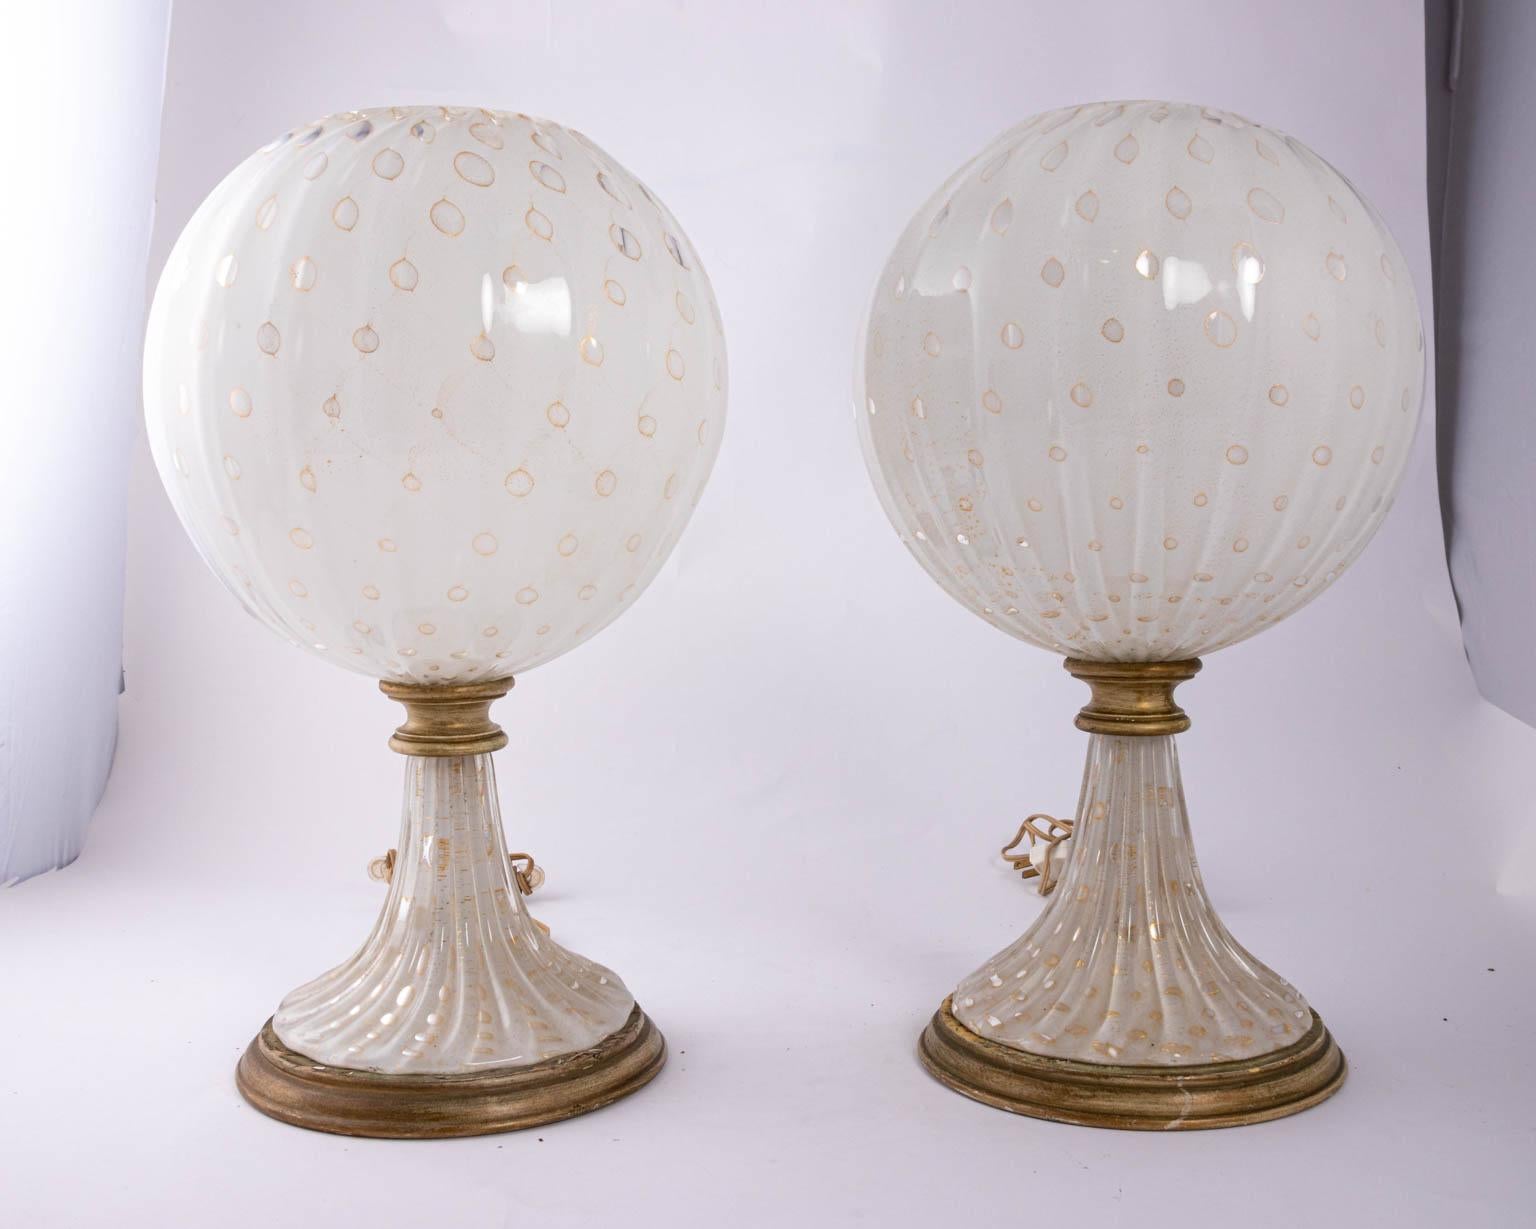 Murano lamps, circa 1950s. Matched pair. Gold Mica with gold infusions. Made in Italy. Opalescent. Midcentury. Minor flaking on bases.